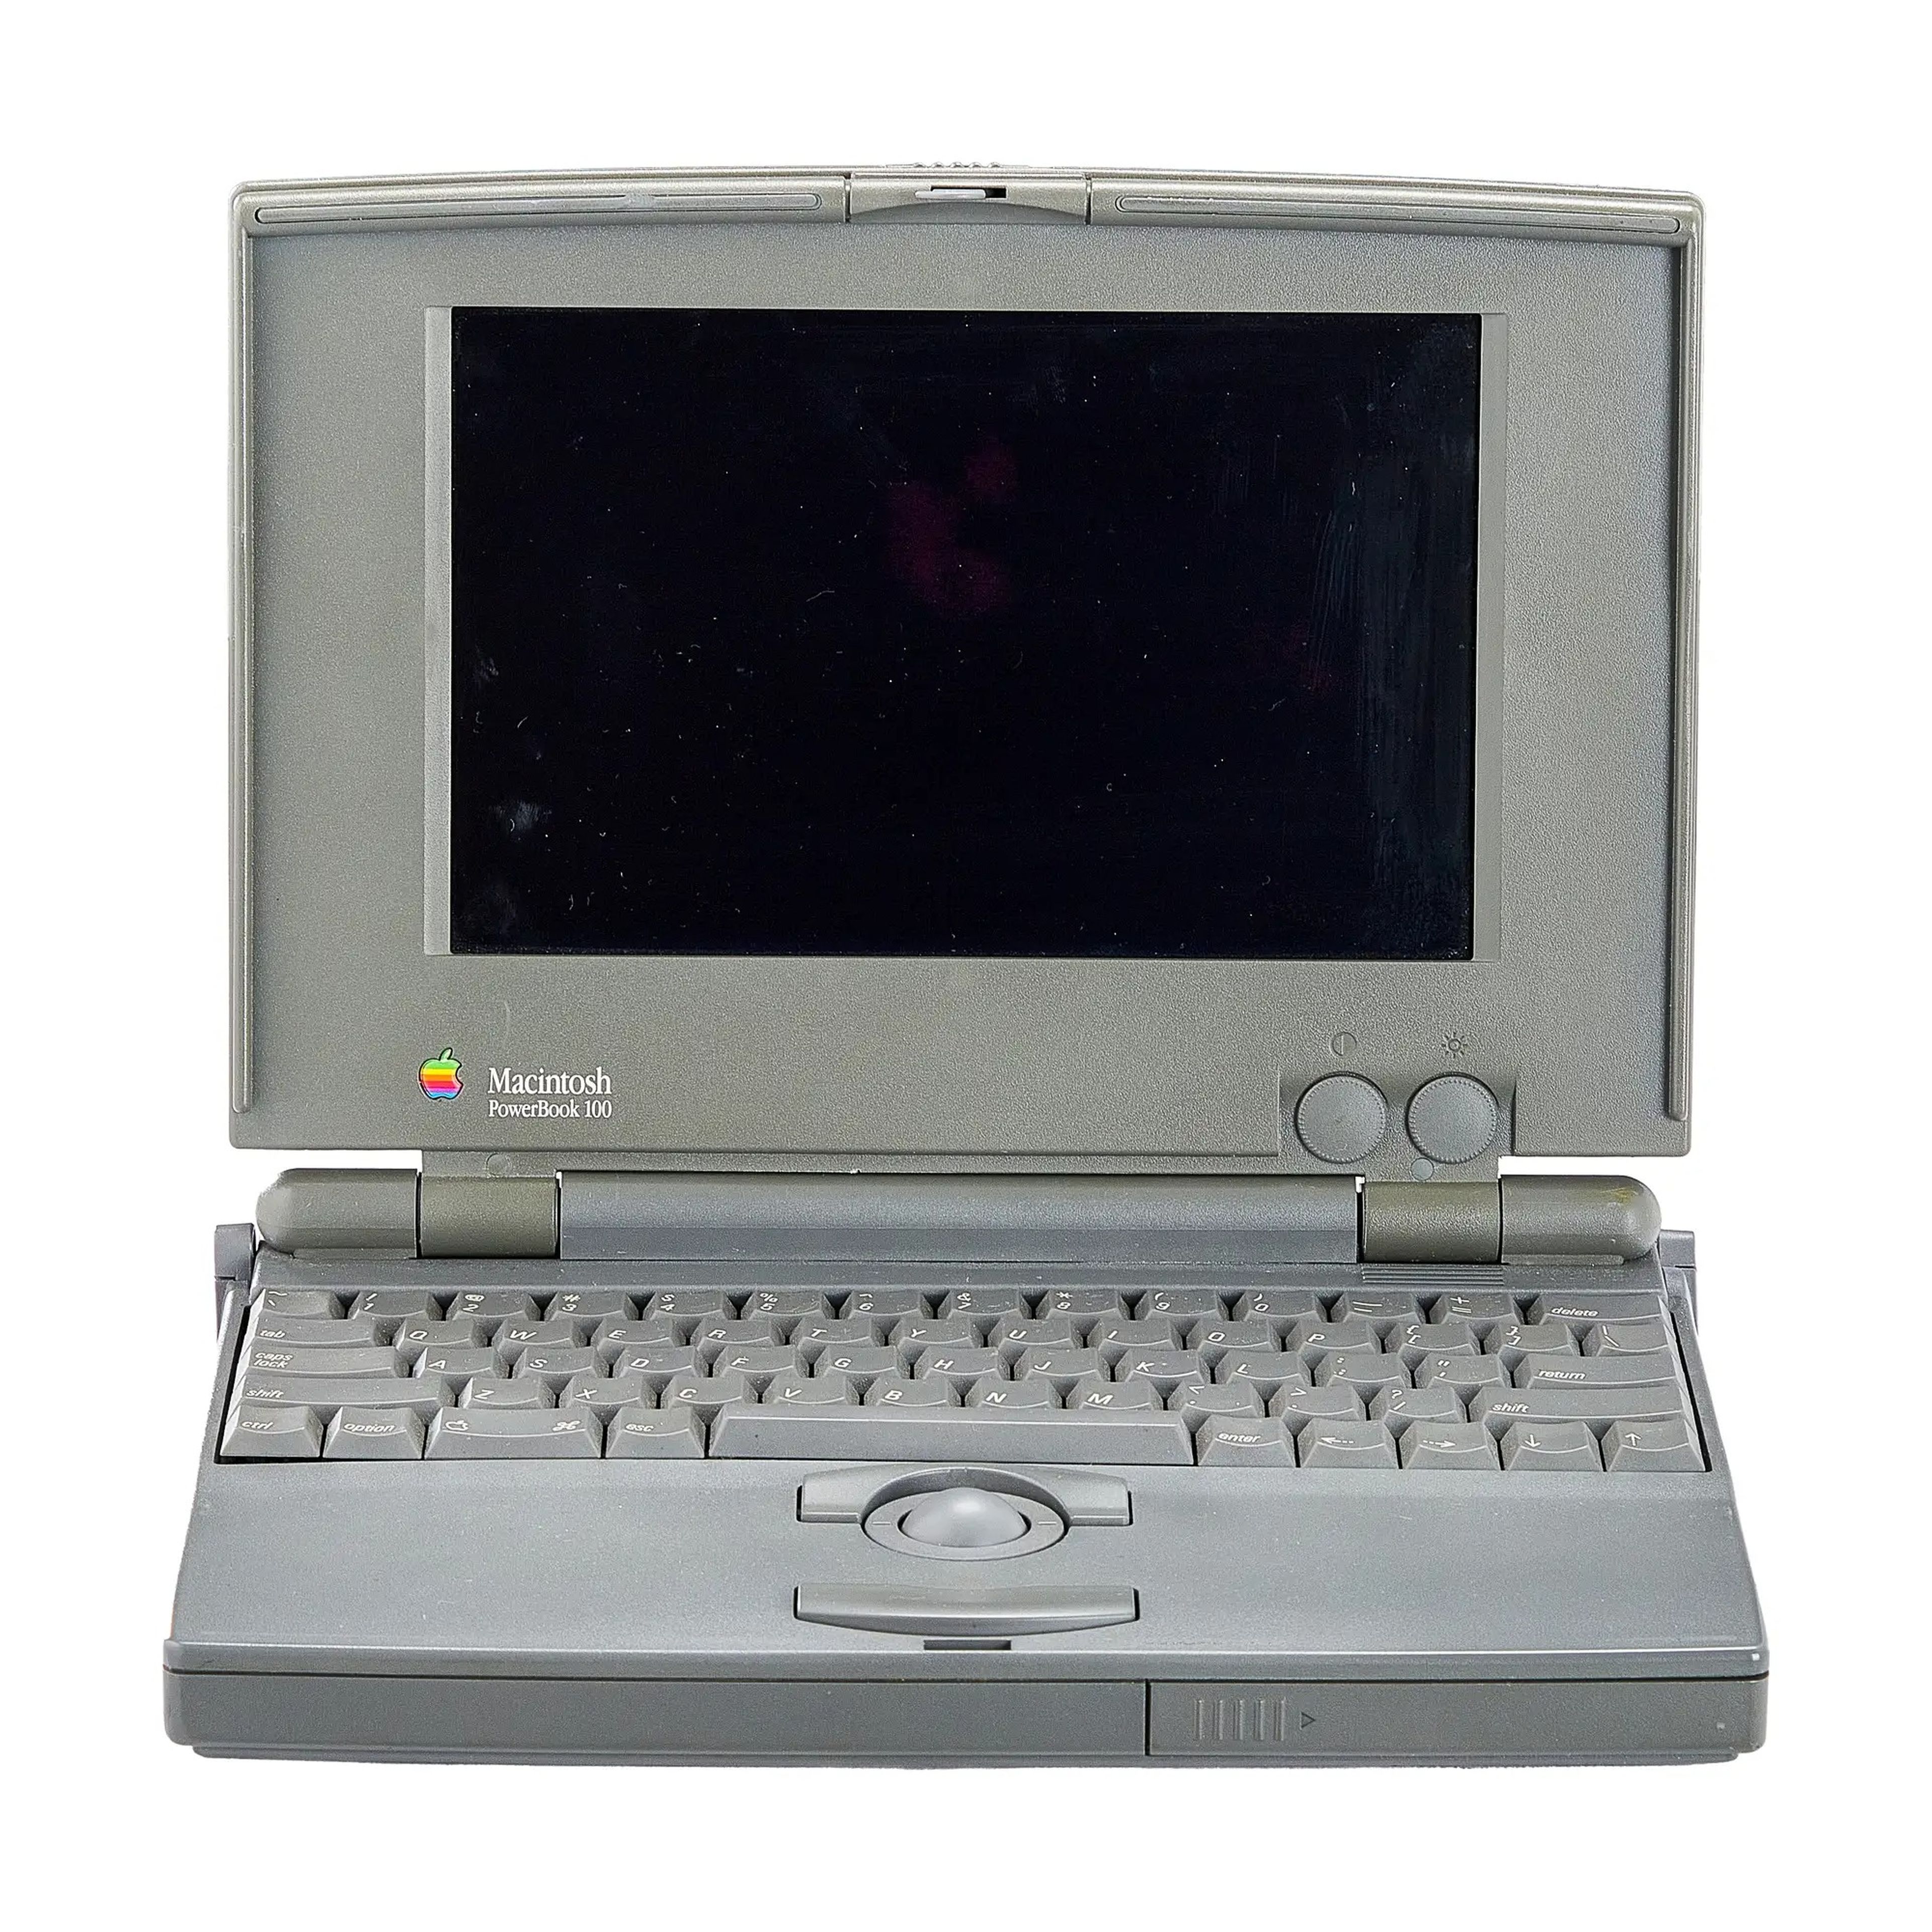 1991 PowerBook 100 that is grey with a black screen, a keyboard, and a roller ball mouse